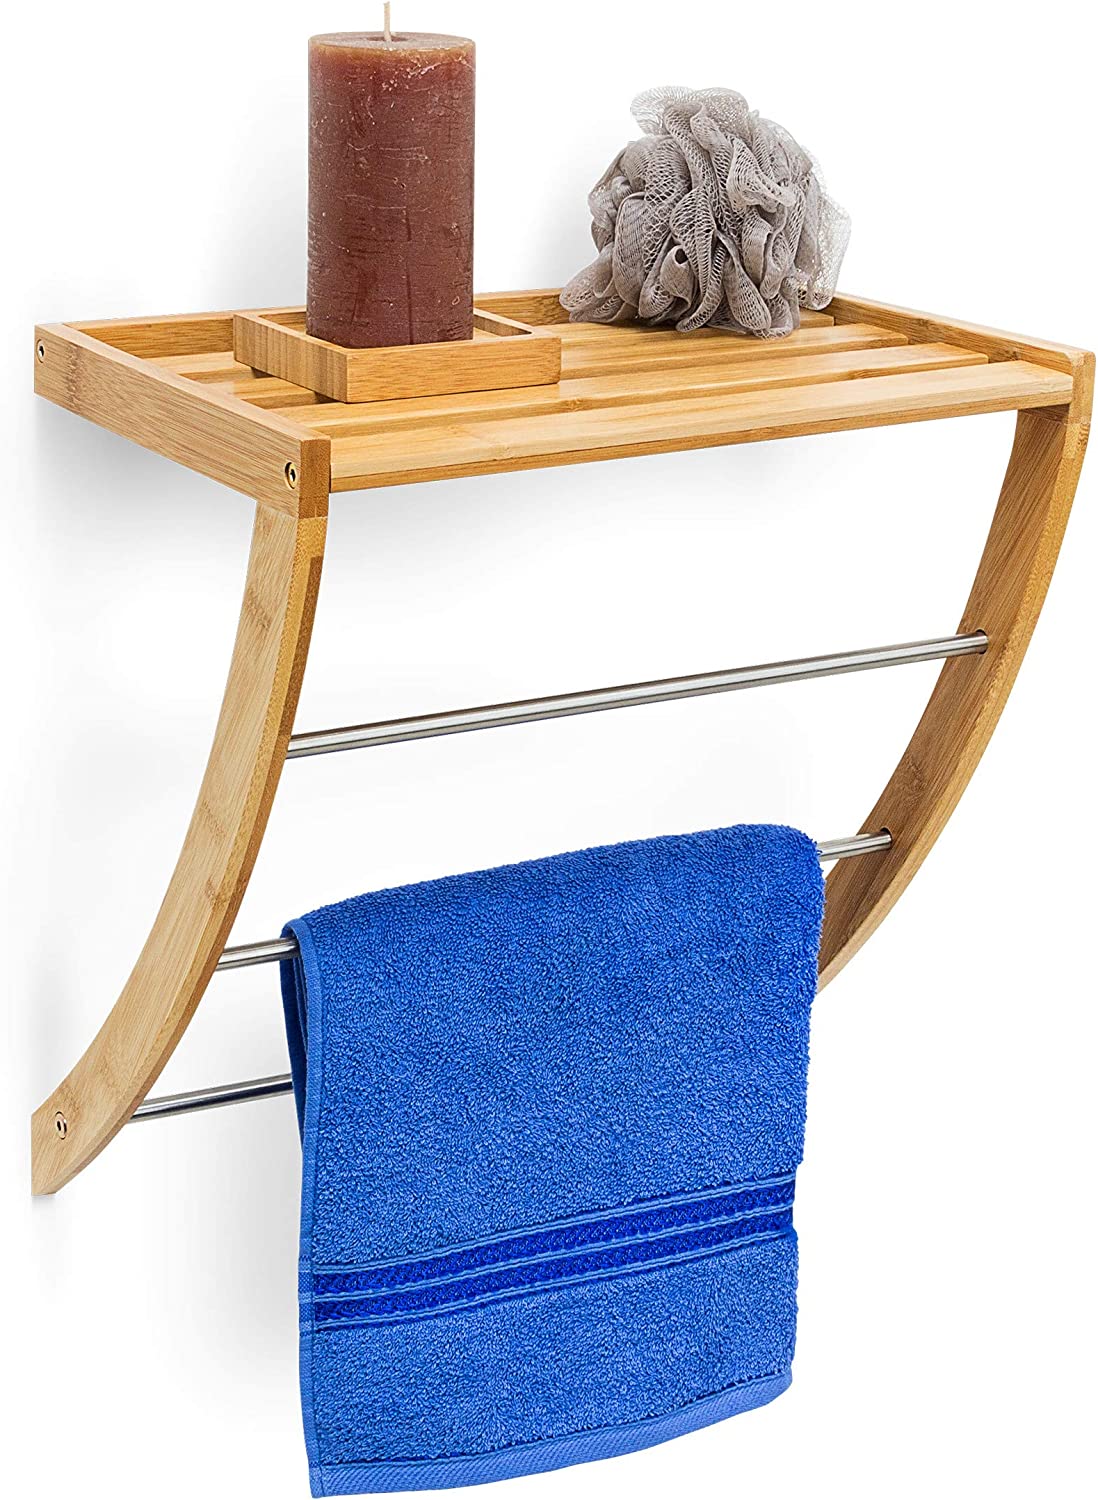 Relaxdays Towel Holder with 3 Towel Rails